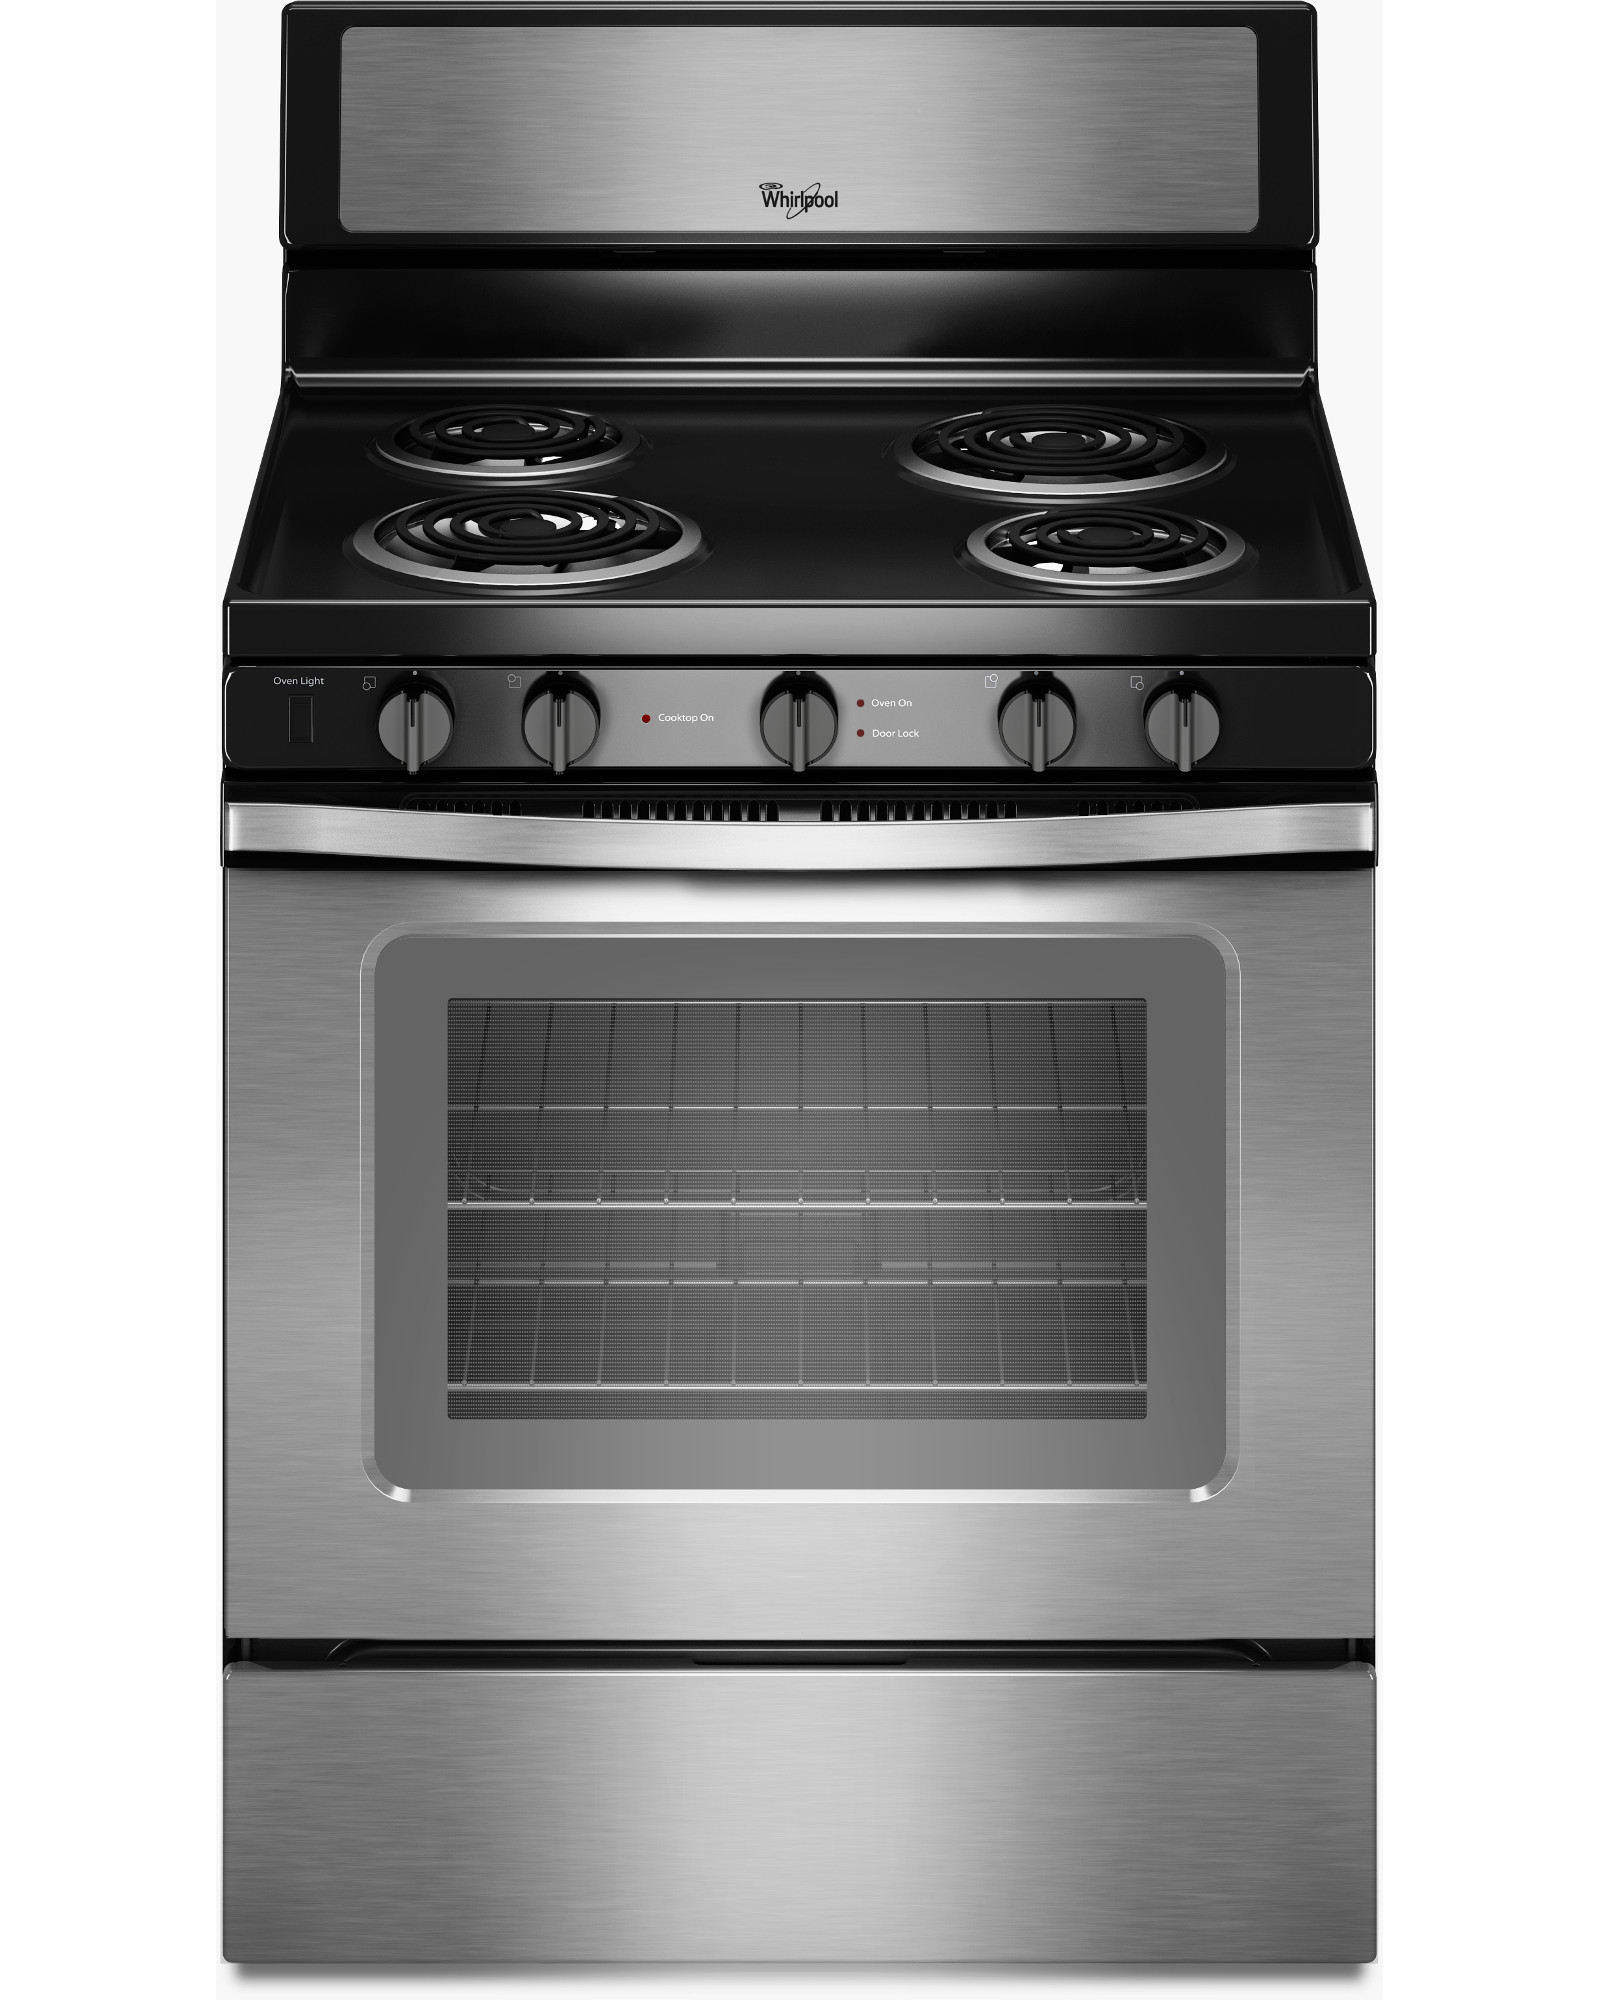 Whirlpool WFC340S0ES 4 8 Cu Ft Electric Range Stainless Steel